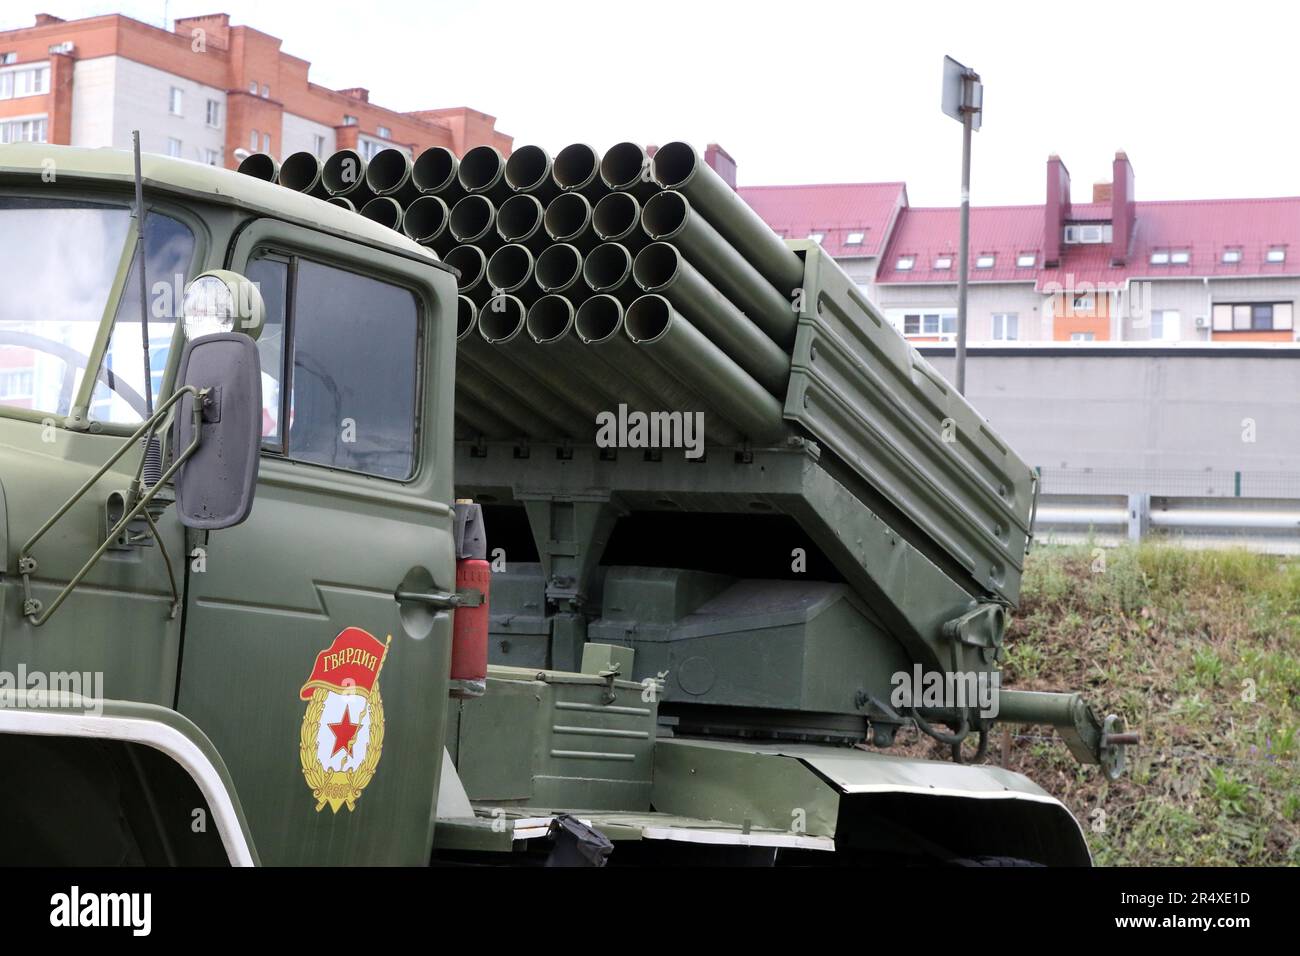 A military truck carrying ammunition, which was previously used by the Armed forces of Russia (Russian army), is presented at an exhibition in Patriot Park. Patriot Park (patriotic park) is a military and culture recreation of the Armed Forces of the Russian Federation (Federal State Autonomous Institution) is located in the Rostov region, in the city of Kamensk-Shakhtinsk, where hundreds of samples of military equipment that was used earlier and is now being used by the Armed Forces of Russian Federation. (Photo by Maksim Konstantinov/SOPA Images/Sipa USA) Stock Photo